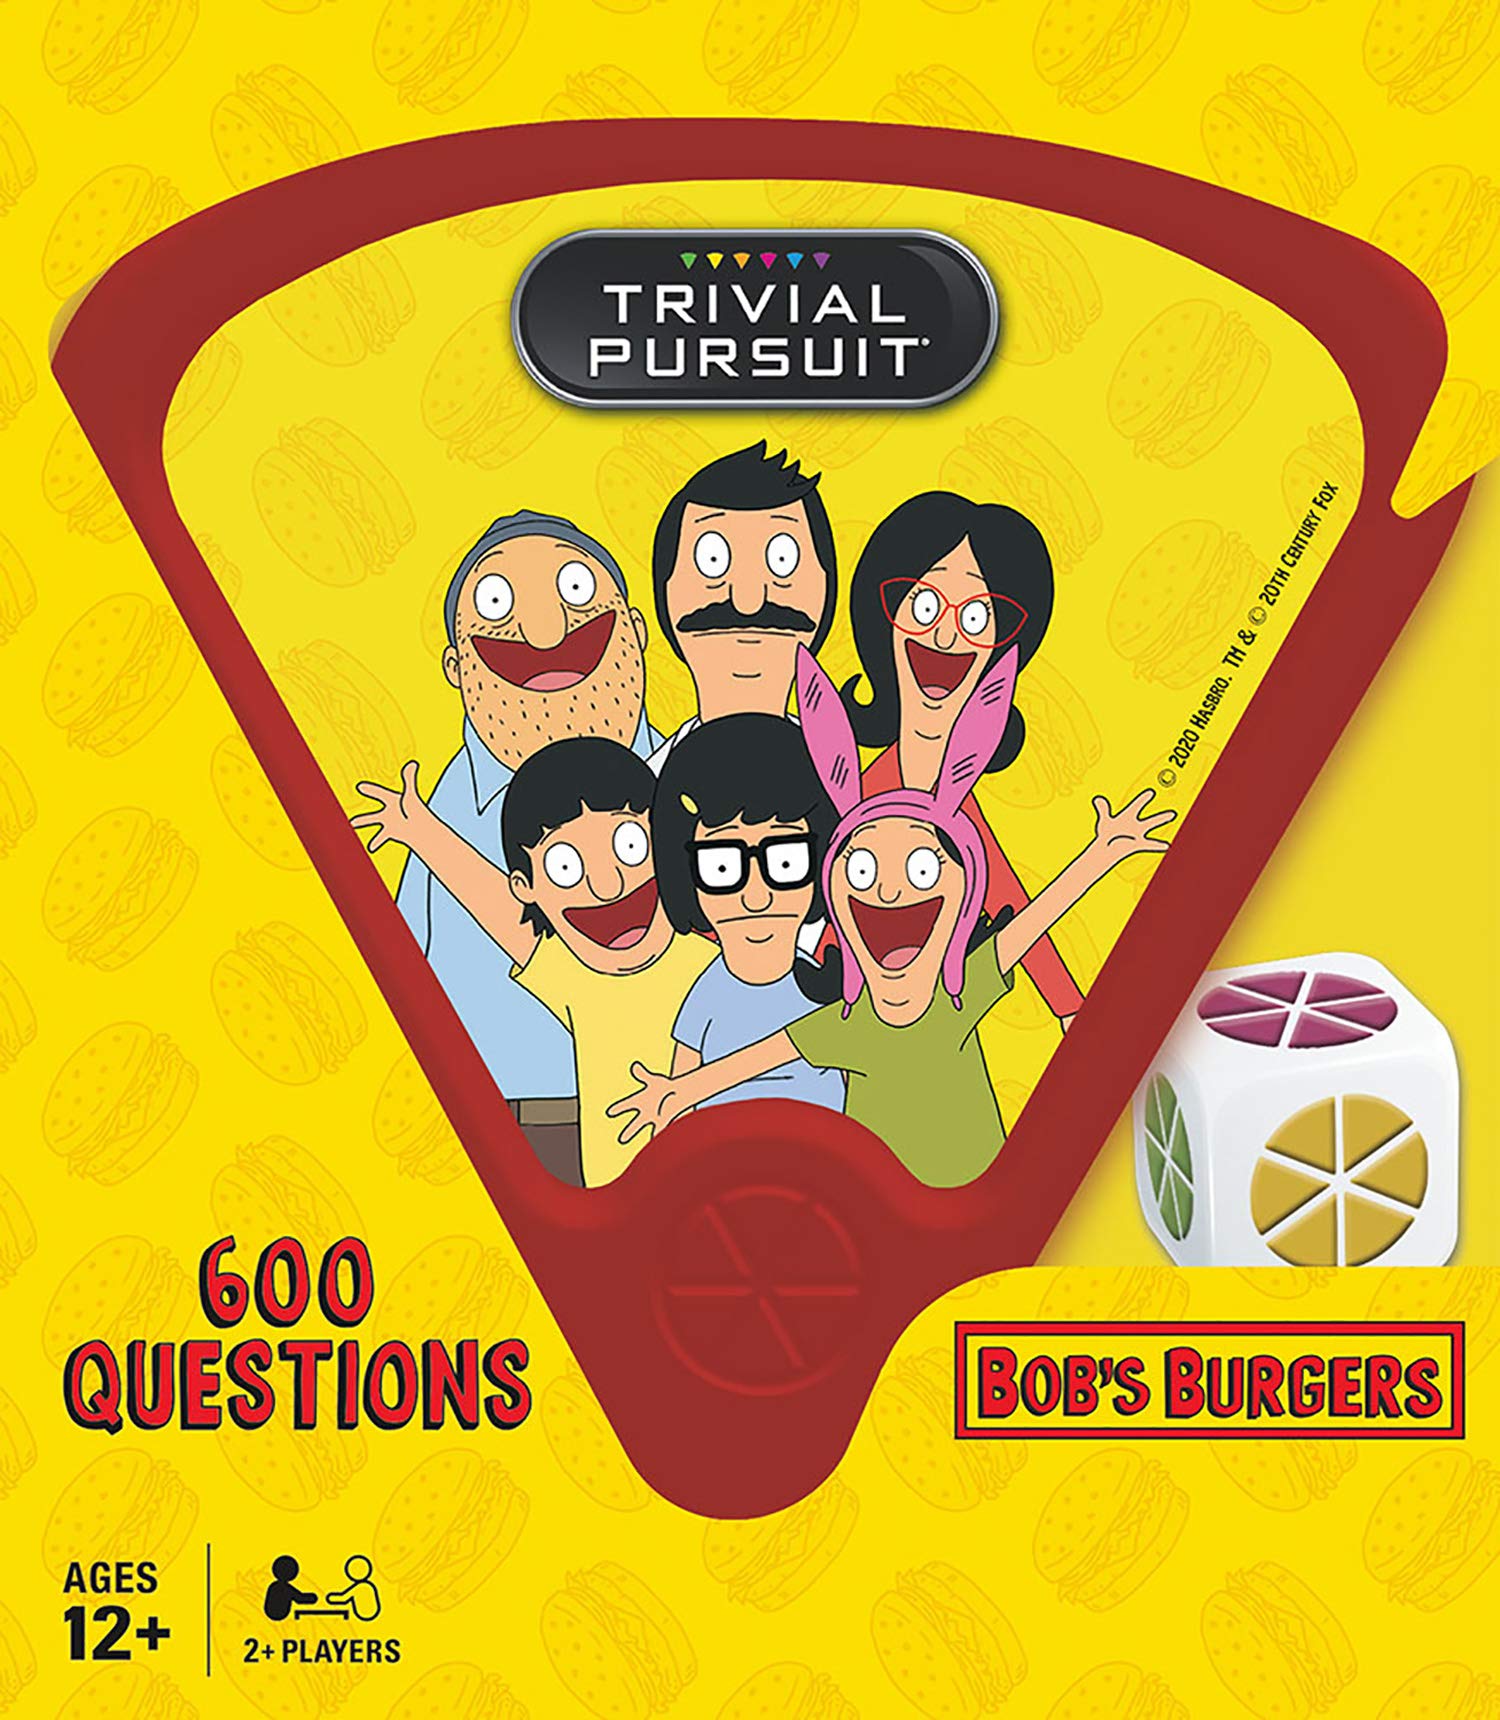 USAOPOLY Trivial Pursuit Bob's Burgers (Quickplay Edition) , Trivia Game Questions from Bob's Burgers , 600 Questions & Die in Travel Container , Officially Licensed Bob's Burgers Game, Yellow